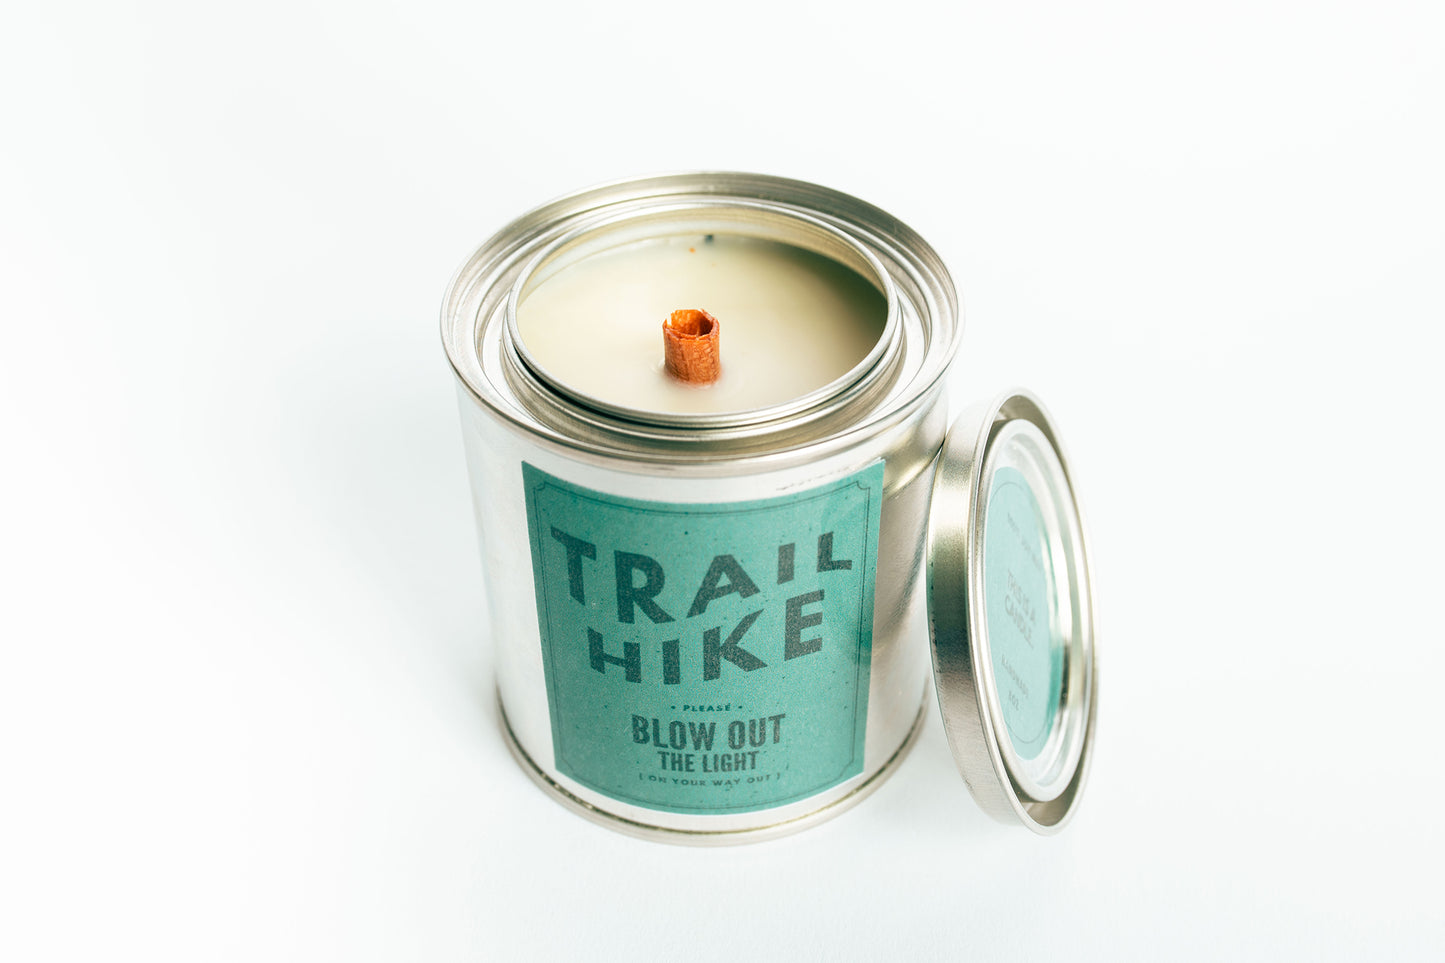 Trail Hike Soy Candle